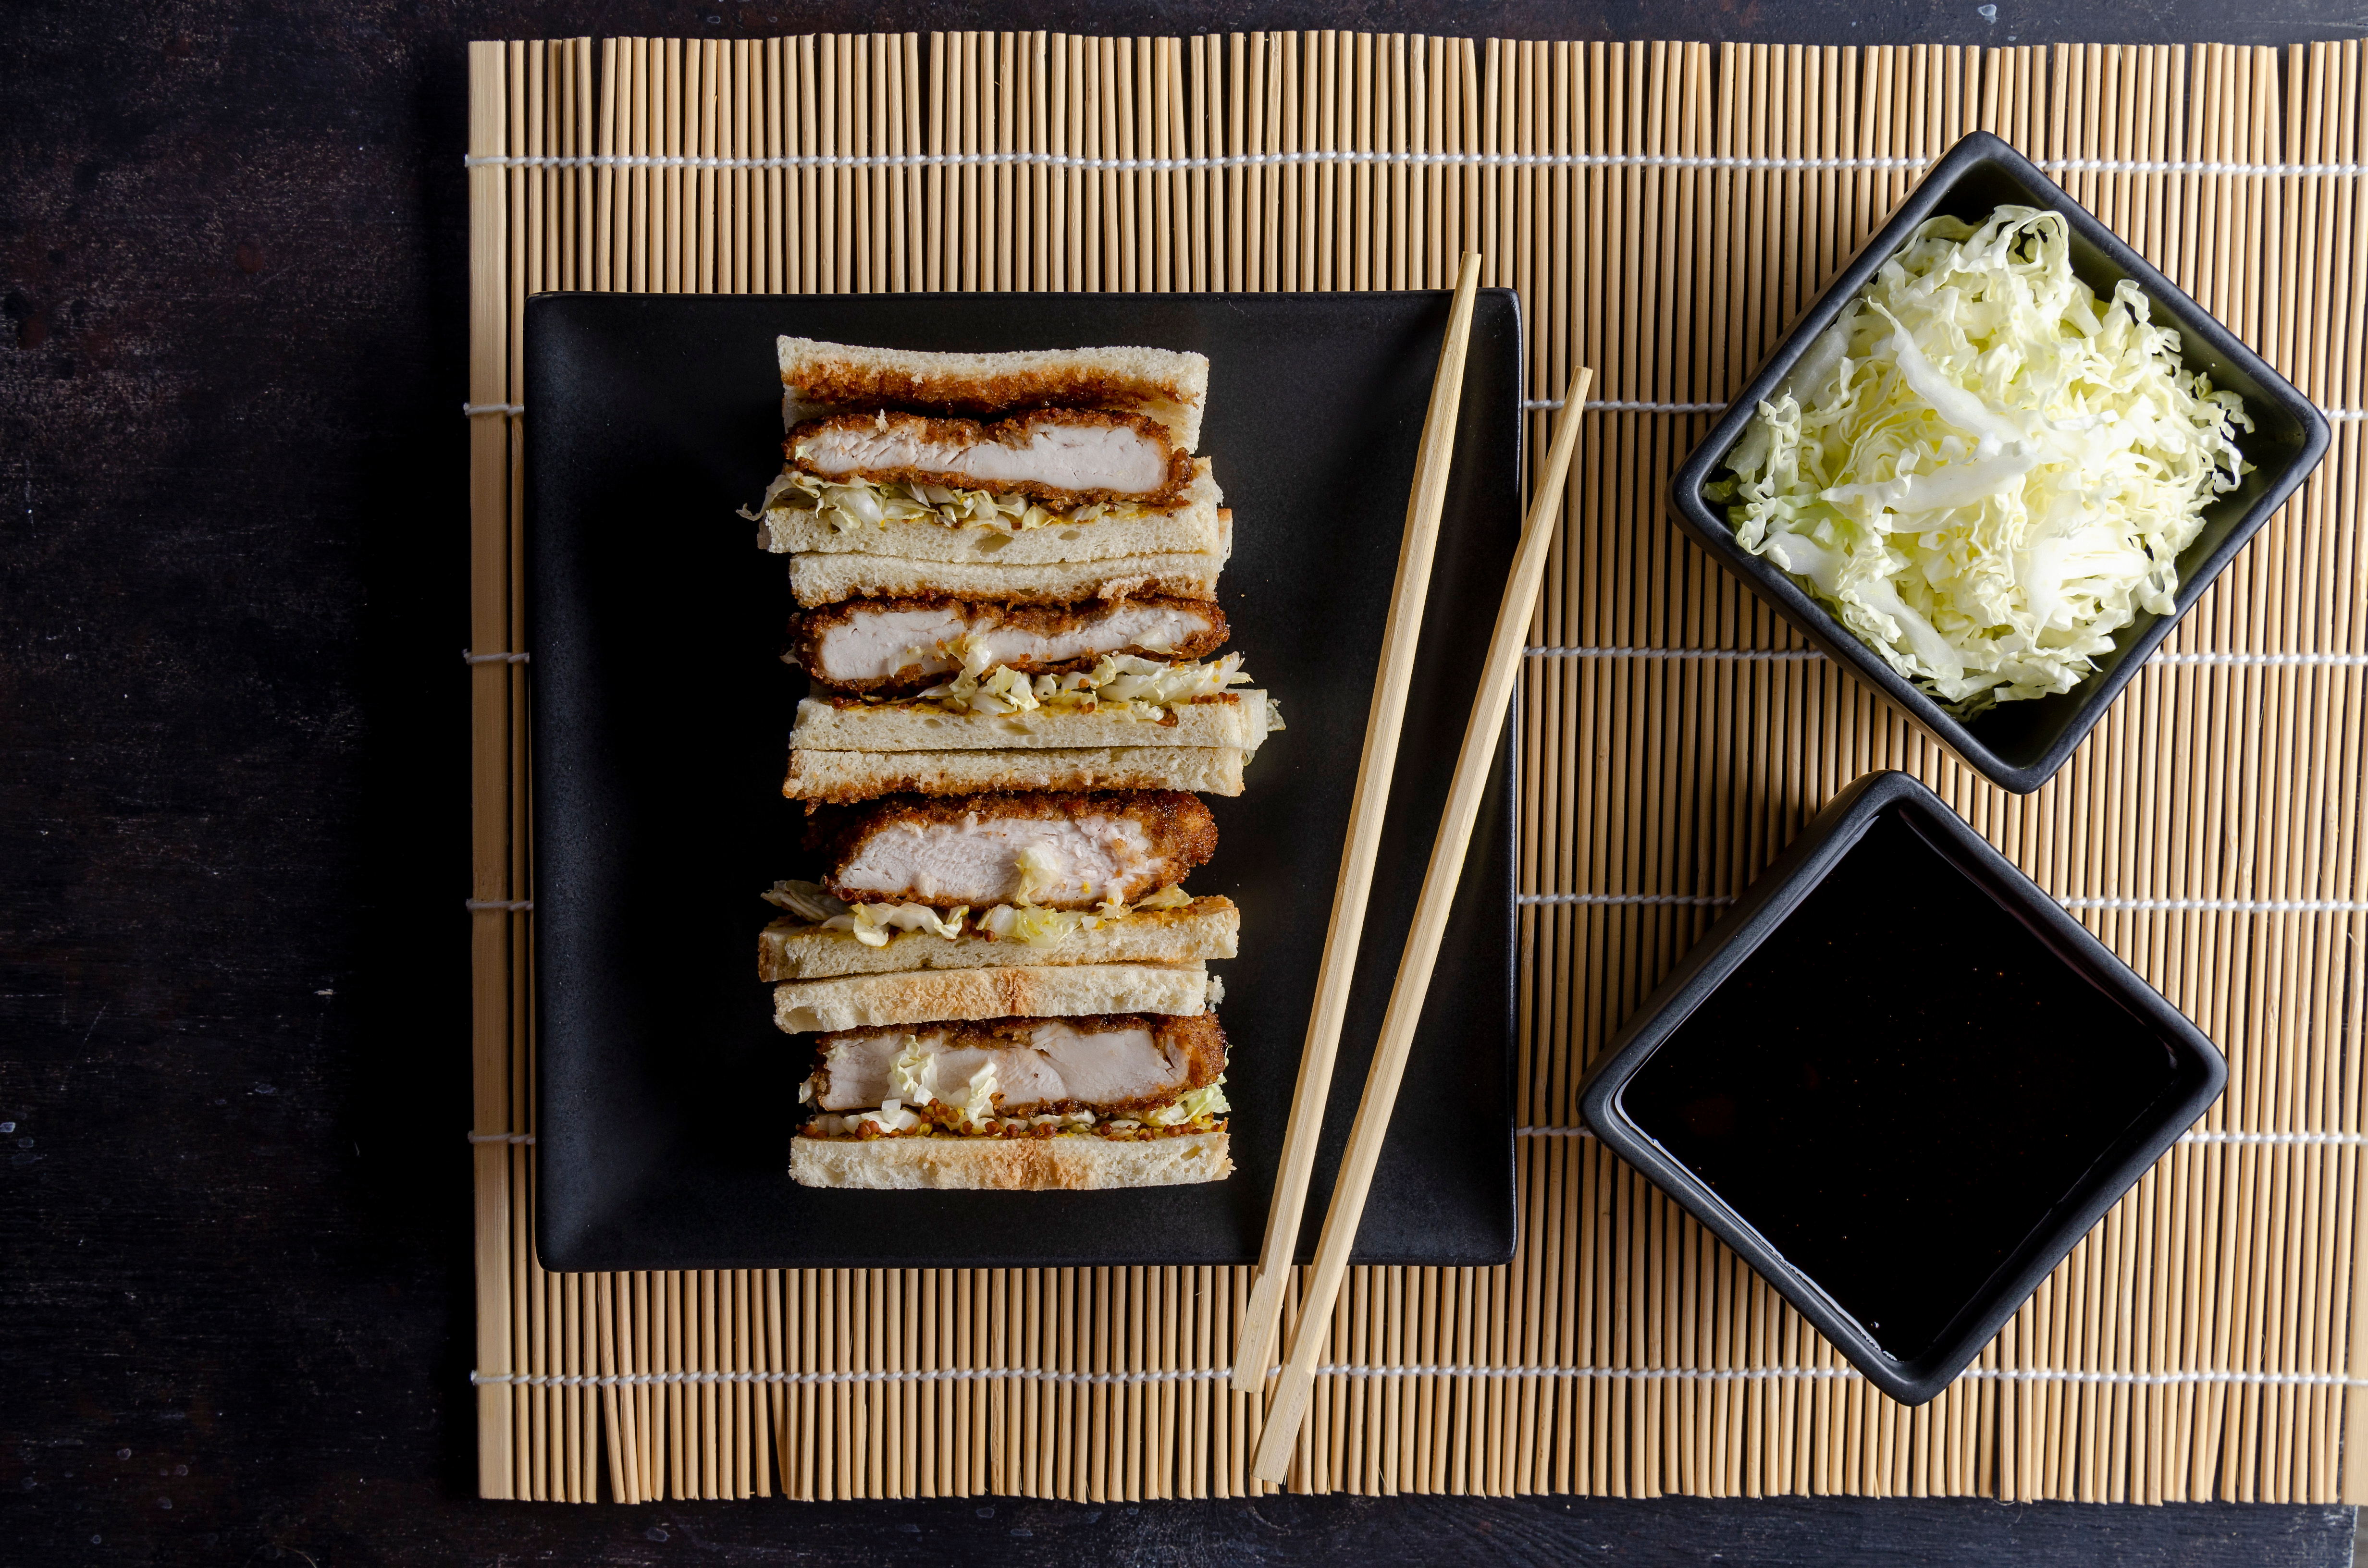 A stock image of four katsu sandwiches, layered with cabbage, with a side of katsu sauce and more shredded cabbage.